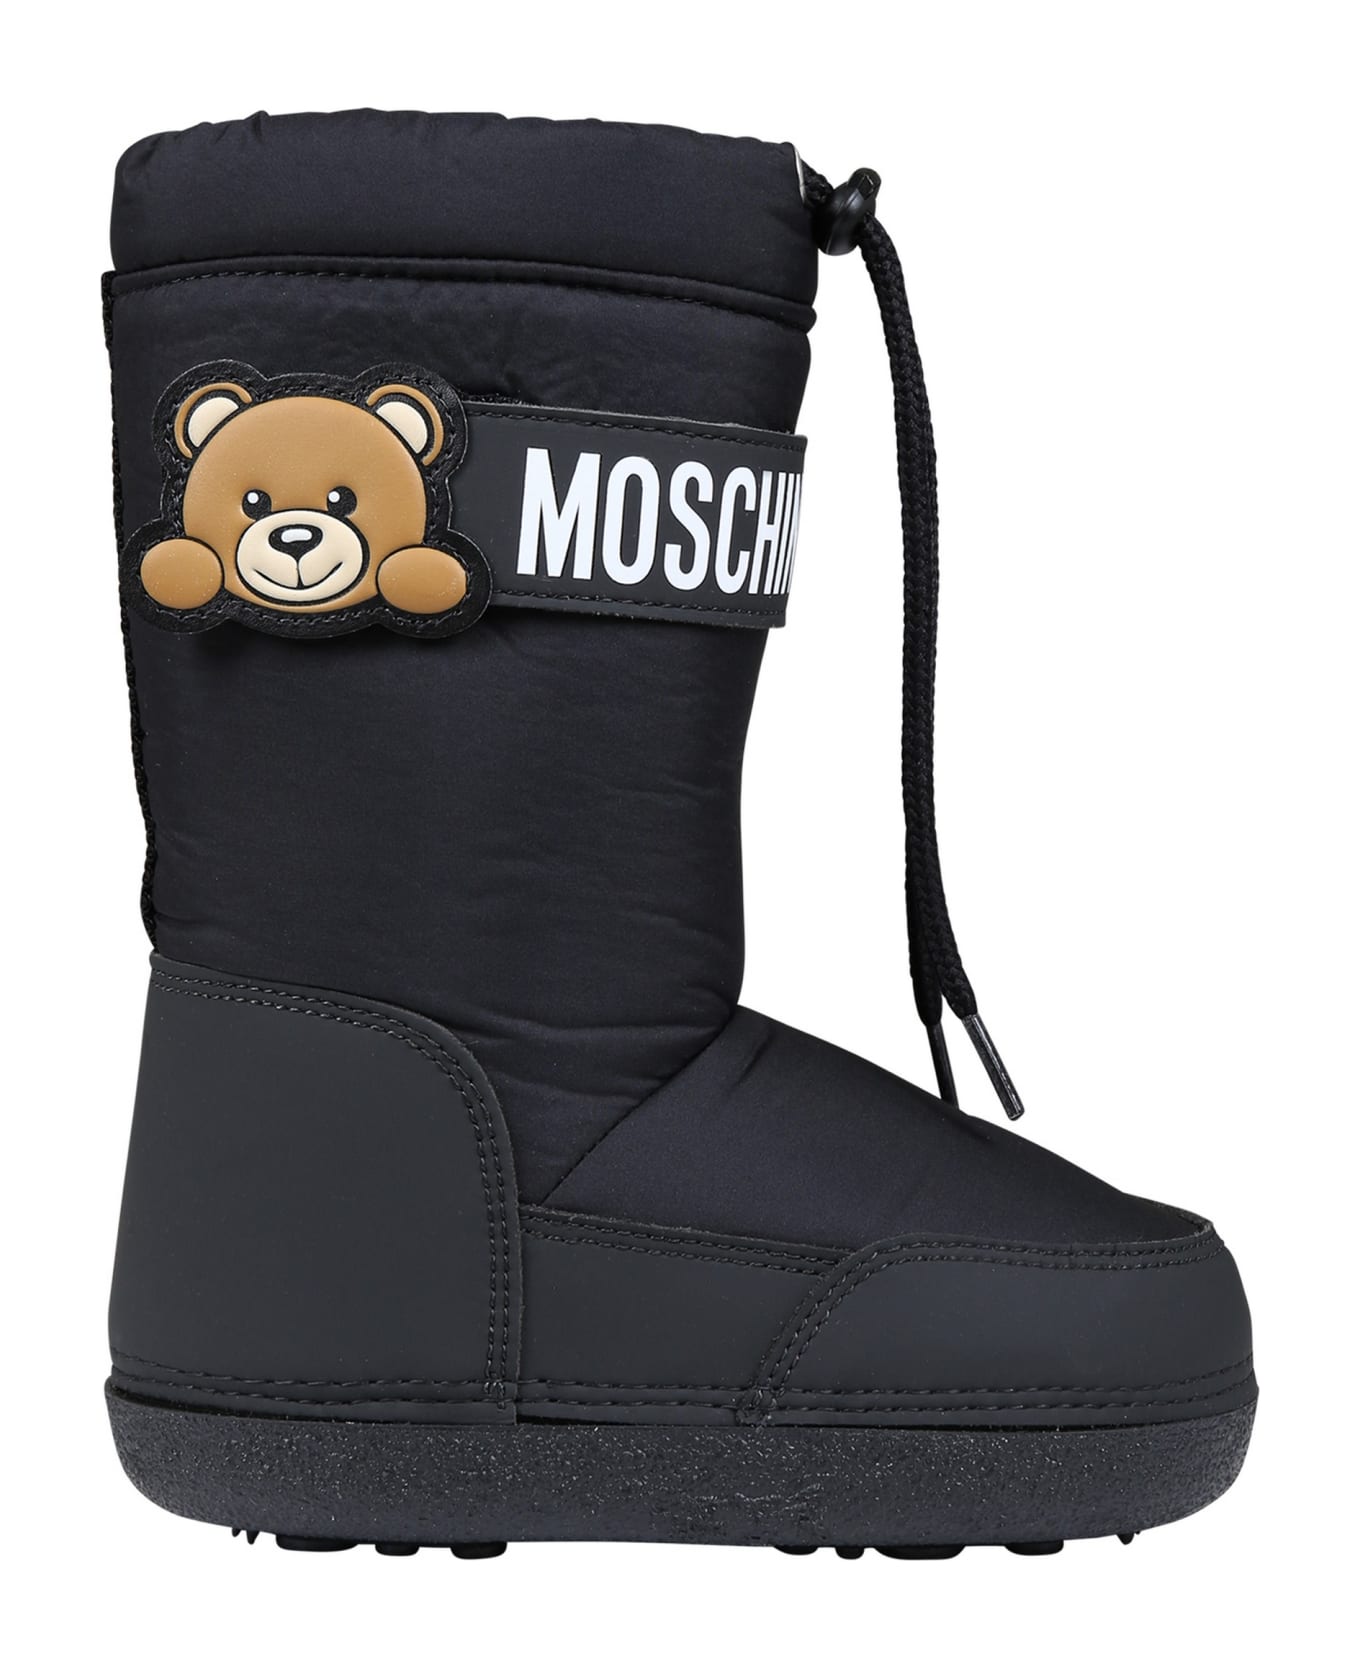 Moschino Balck Boots For Girl With Teddy Bear And Logo - Black